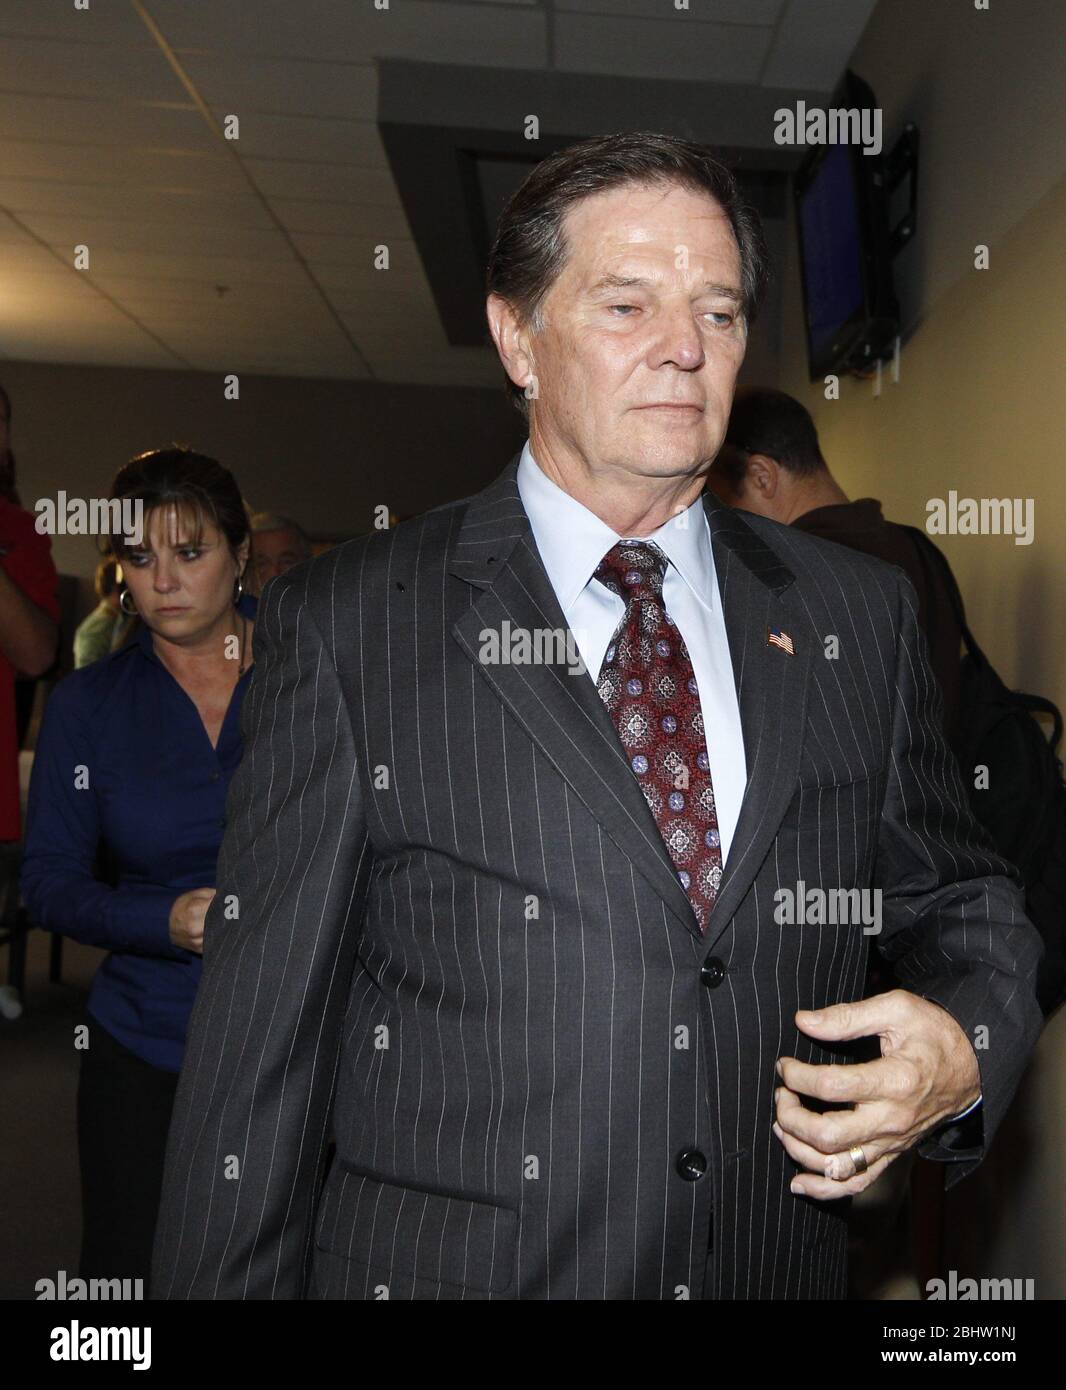 Austin Texas USA, November 24, 2010: Former U.S. Congressman and House Majority Leader Tom Delay leaves the Travis County Courthouse after a jury found him guilty of money laundering and conspiracy charges in connection with Texas campaign donations dating back to 2002. ©Bob Daemmrich Stock Photo